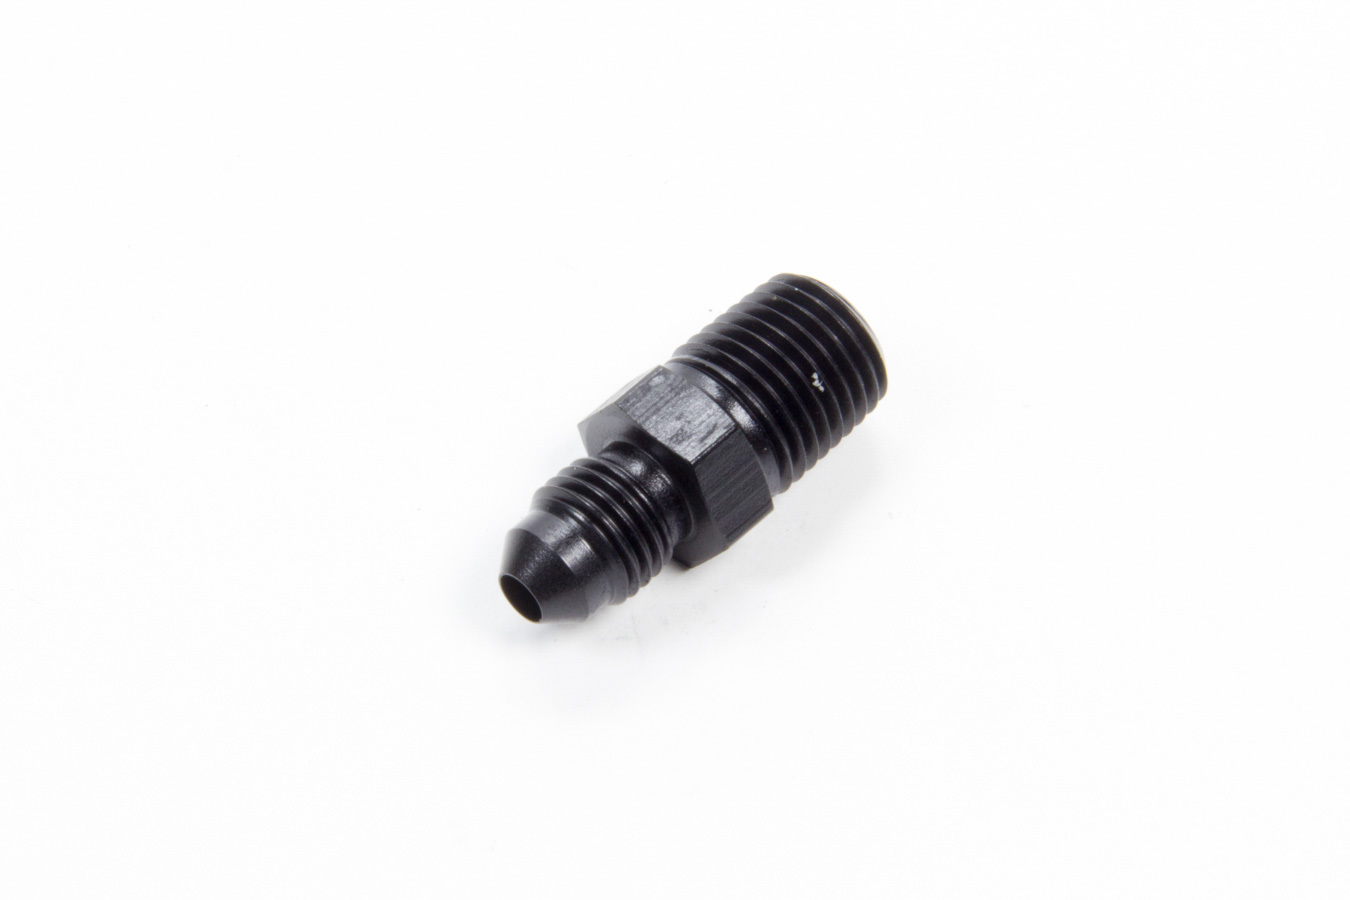 Aeroquip FCM5002 Fitting, Adapter, Straight, 4 AN Male to 1/4 in NPT Male, Aluminum, Black Anodized, Each